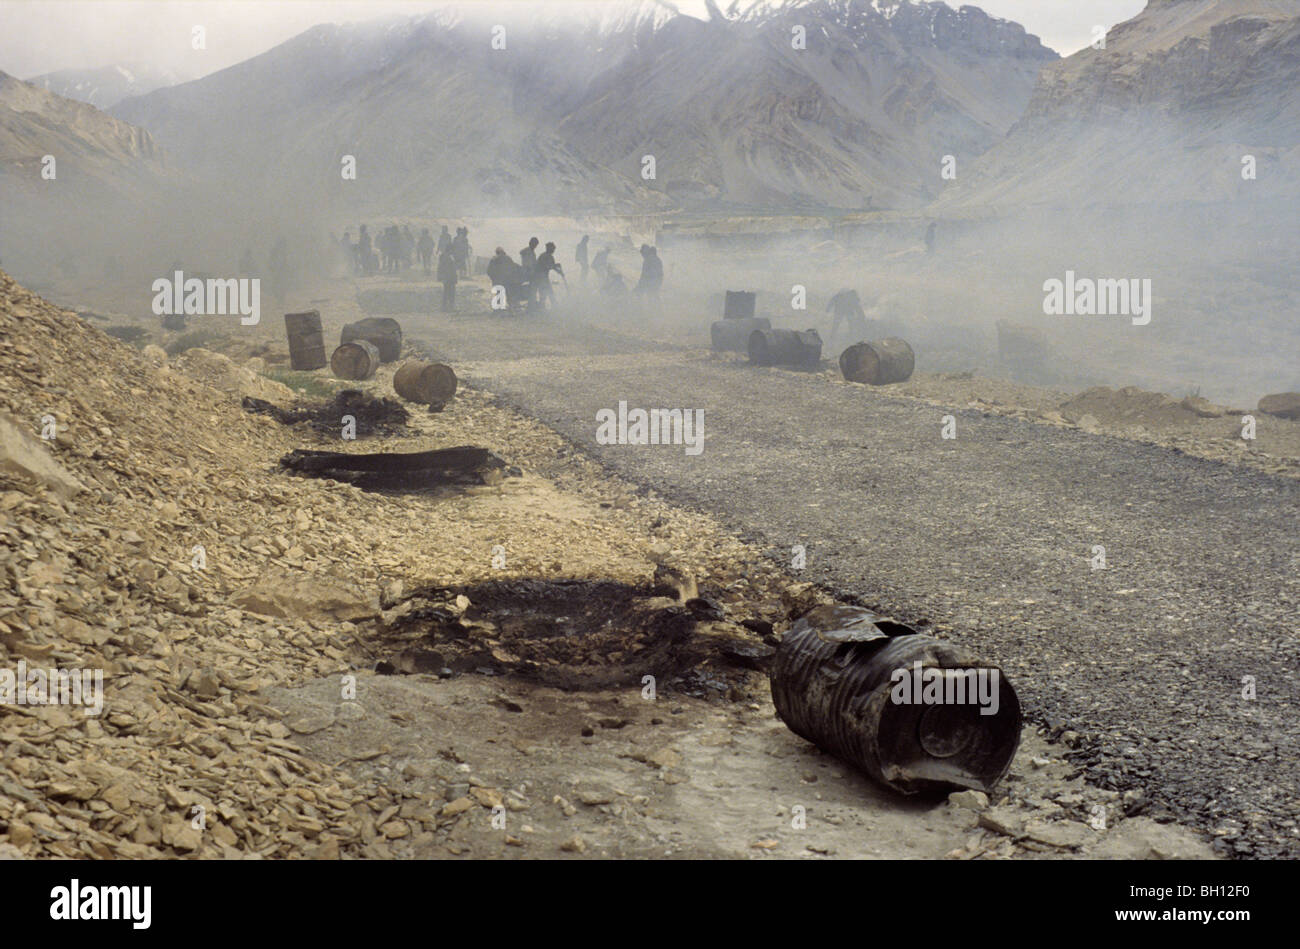 Road construction in Northern India between Manali and Leh, Ladakh. Stock Photo